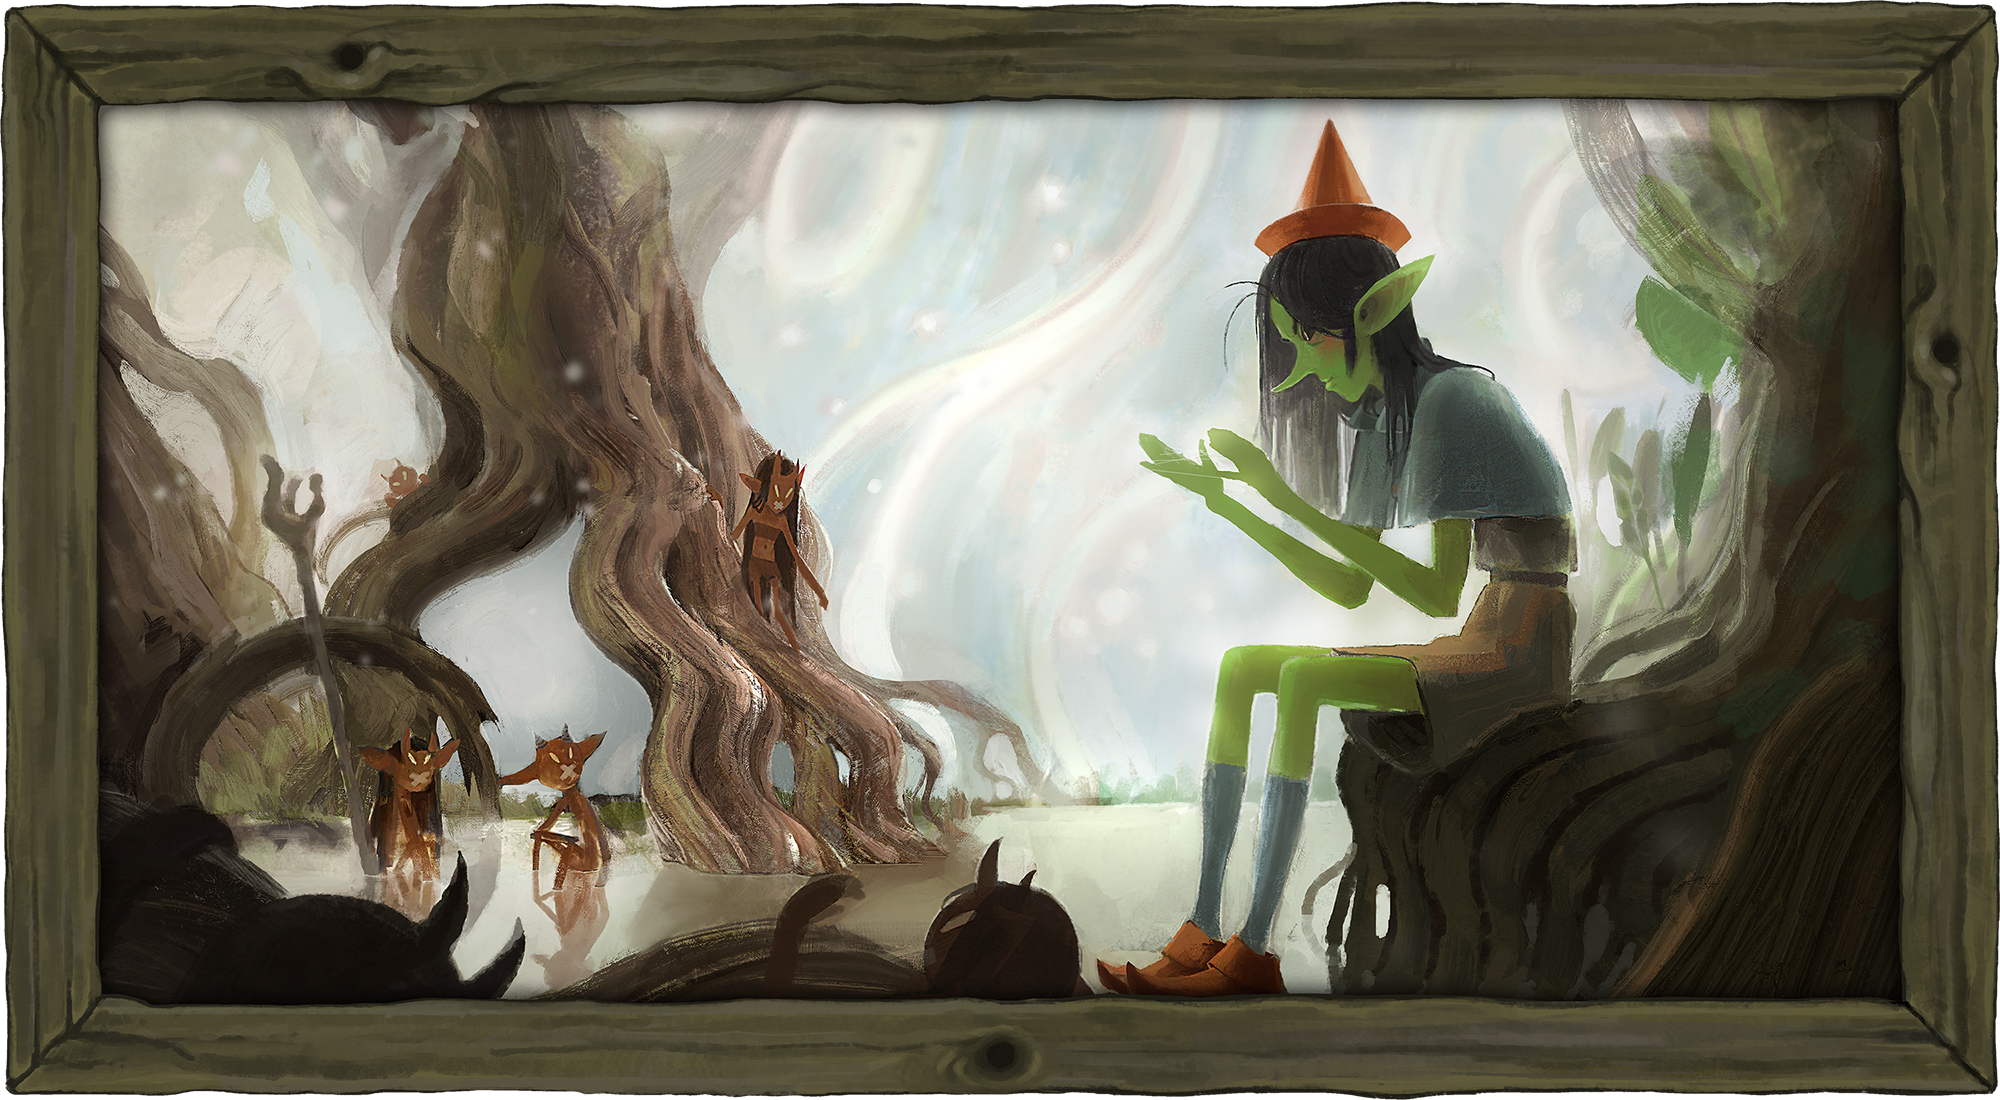 young female goblin with red hat and blue socks is seated on tree stump chair as she looks at the cats cradle in her hands with small imps and wavy tree stumps to her left